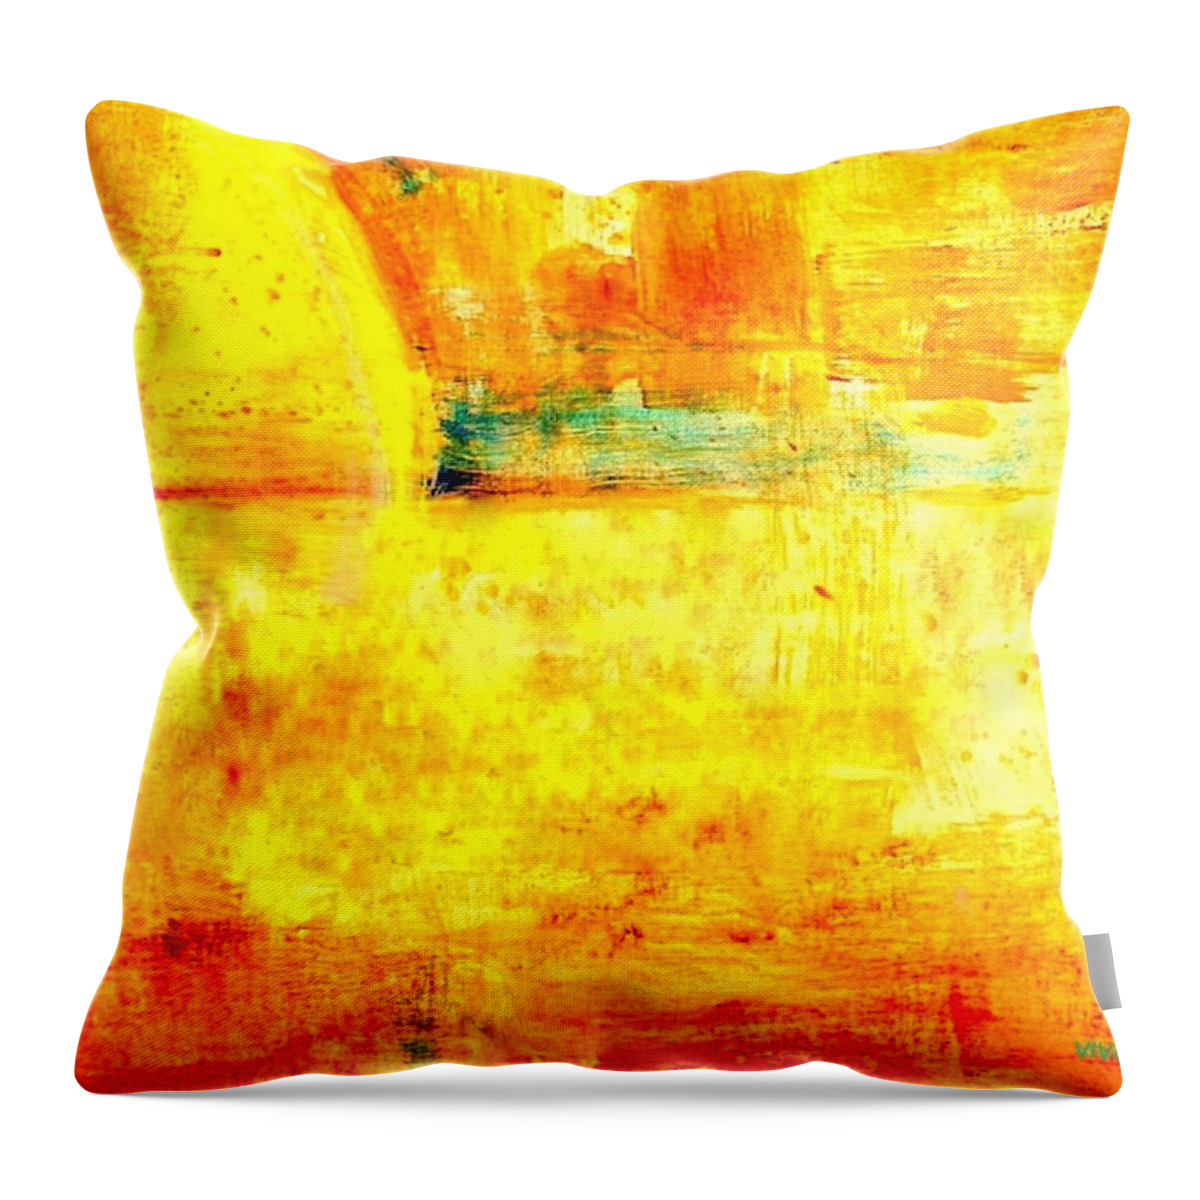 Sunshower Throw Pillow featuring the painting Sunshower by VIVA Anderson